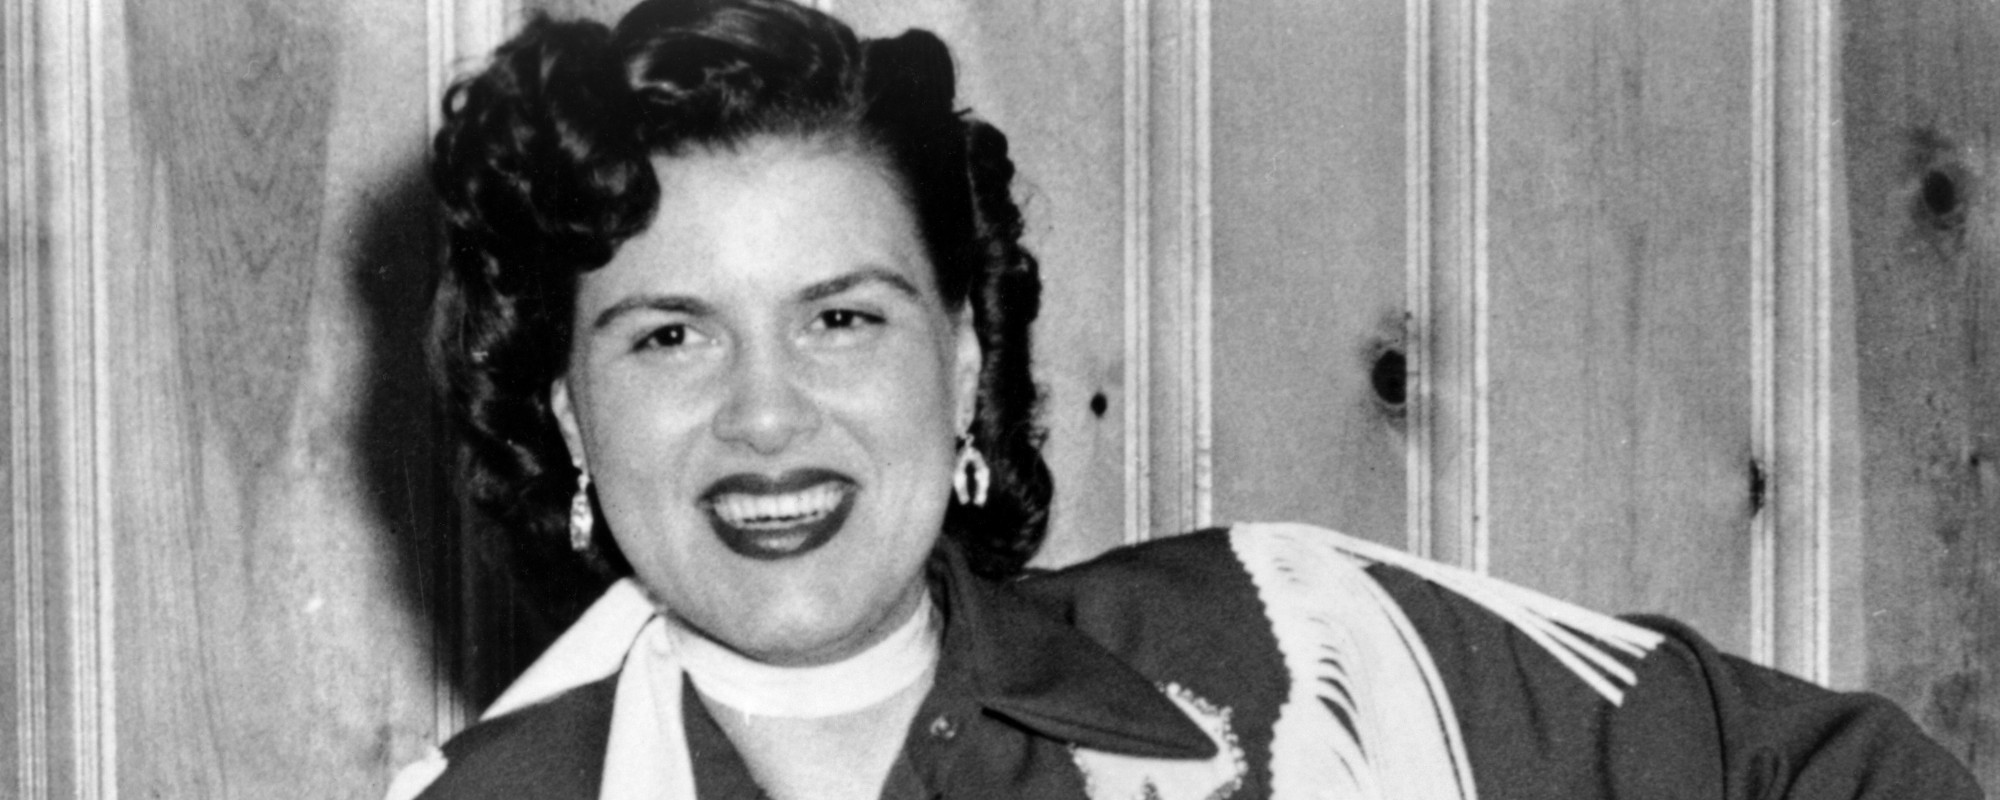 “It Was Just Like Satin”: The Story Behind “I Fall to Pieces” by Patsy Cline